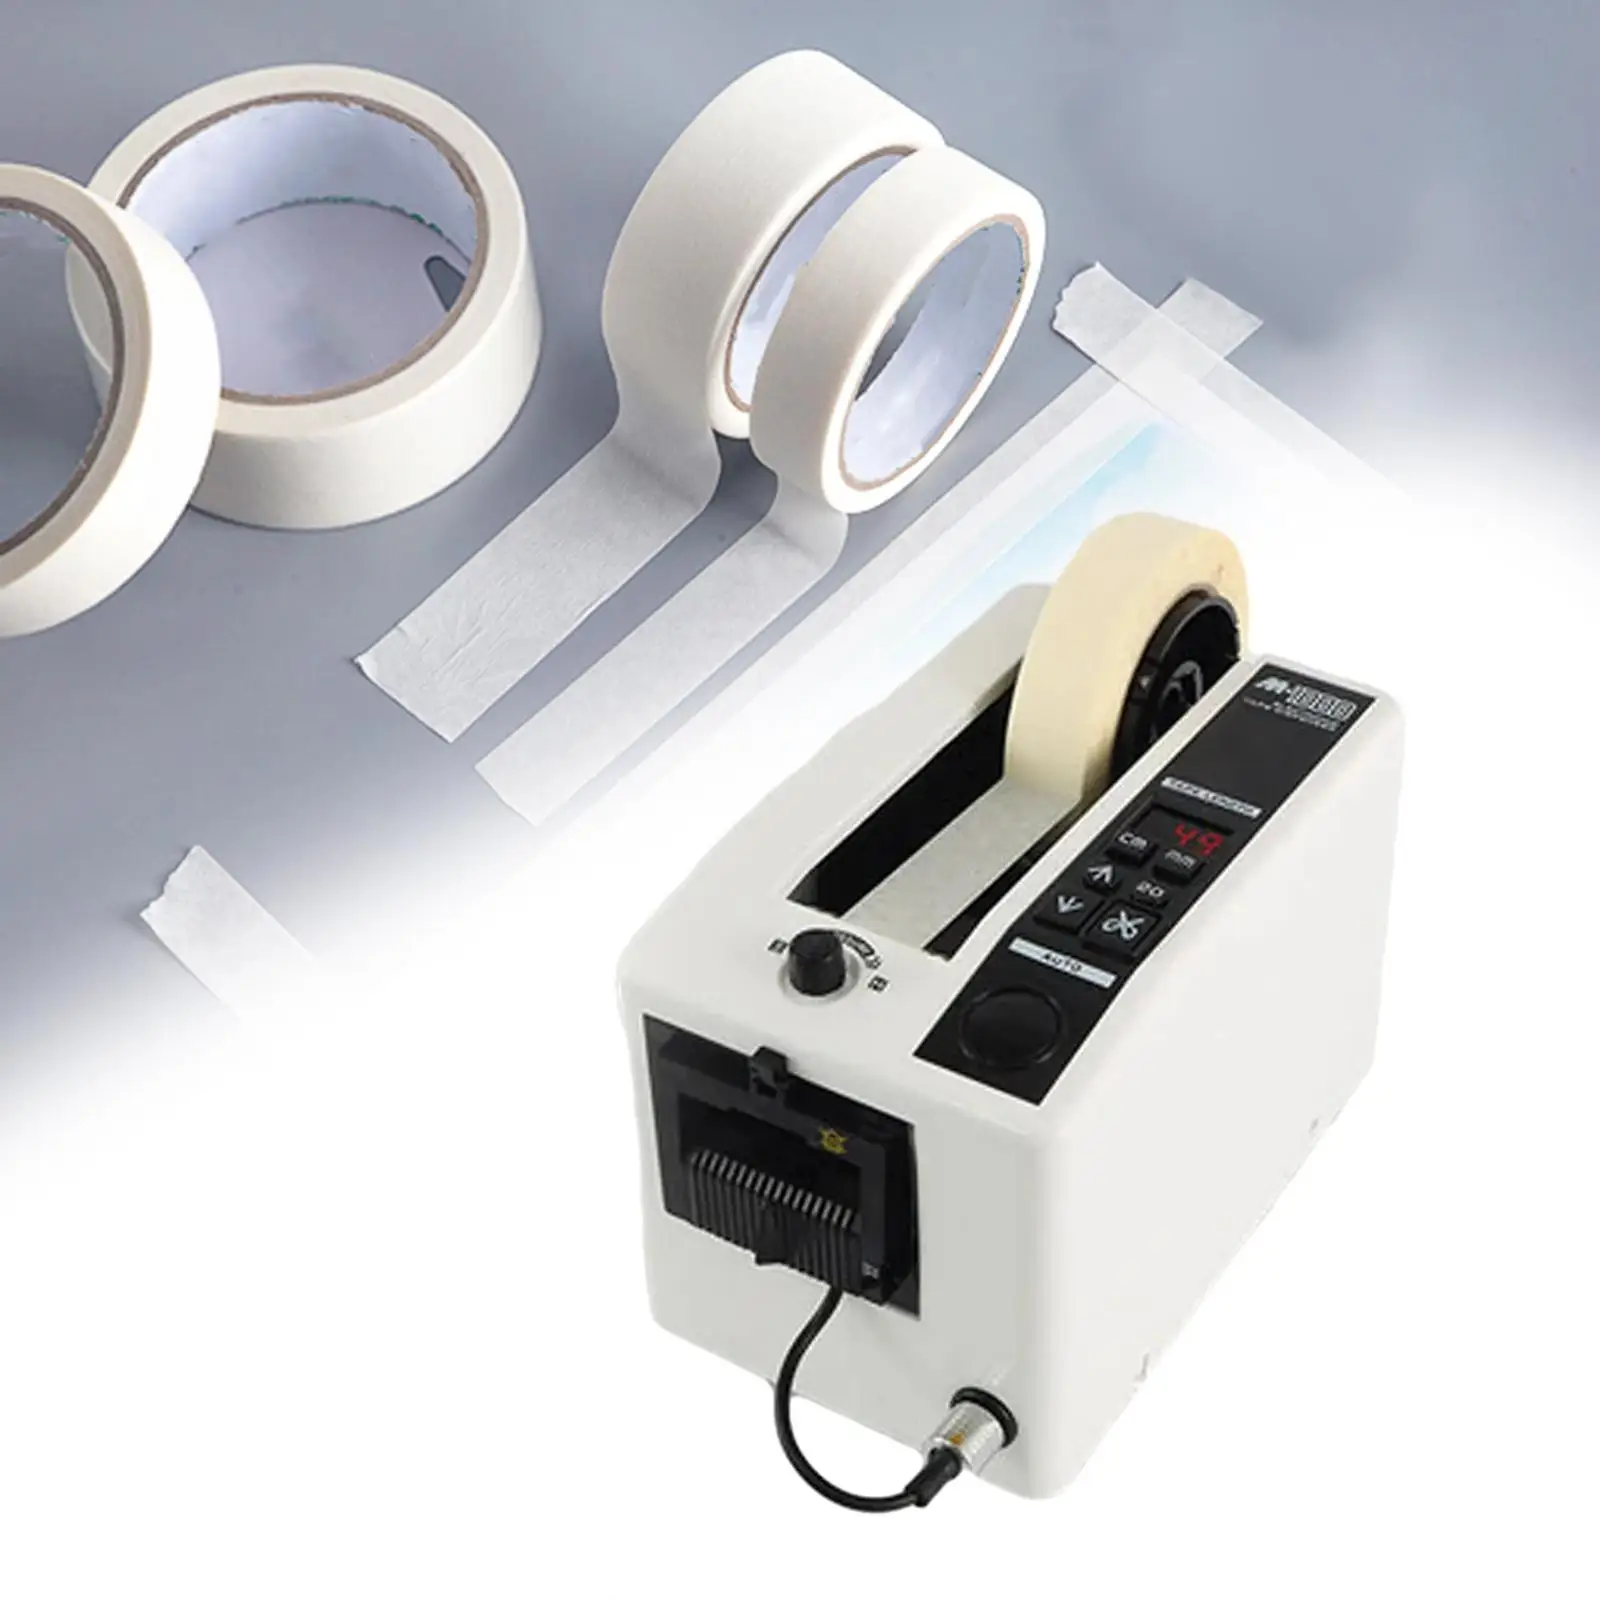 Automatic Tape Dispenser Manual Auto Mode Portable Multipurpose Tape Cutter for 6-50mm Width Tapes Scotch Tape Masking Tape